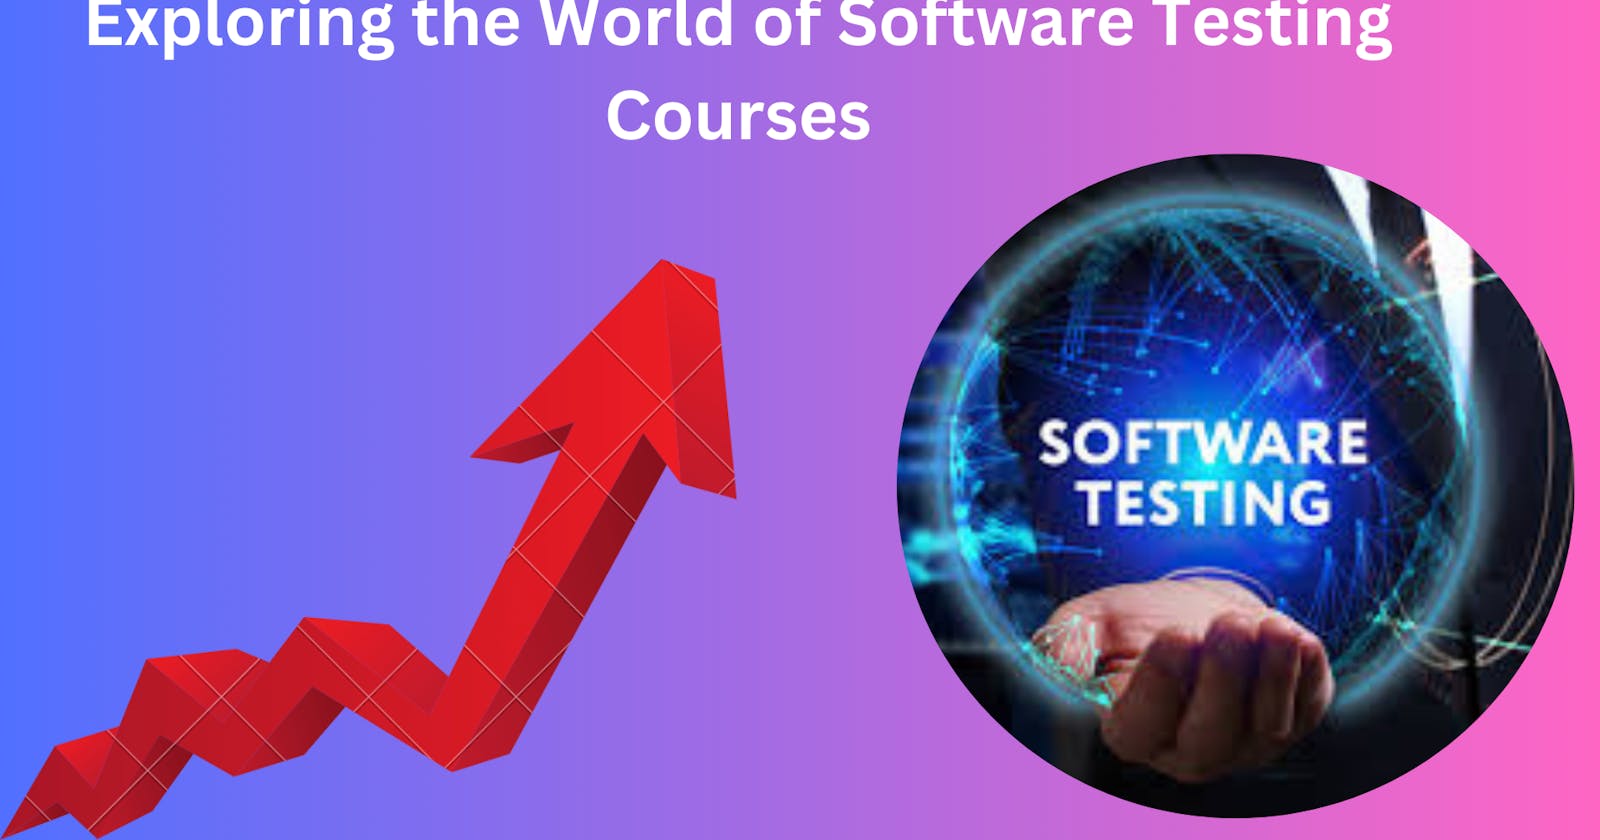 Exploring the World of Software Testing Courses